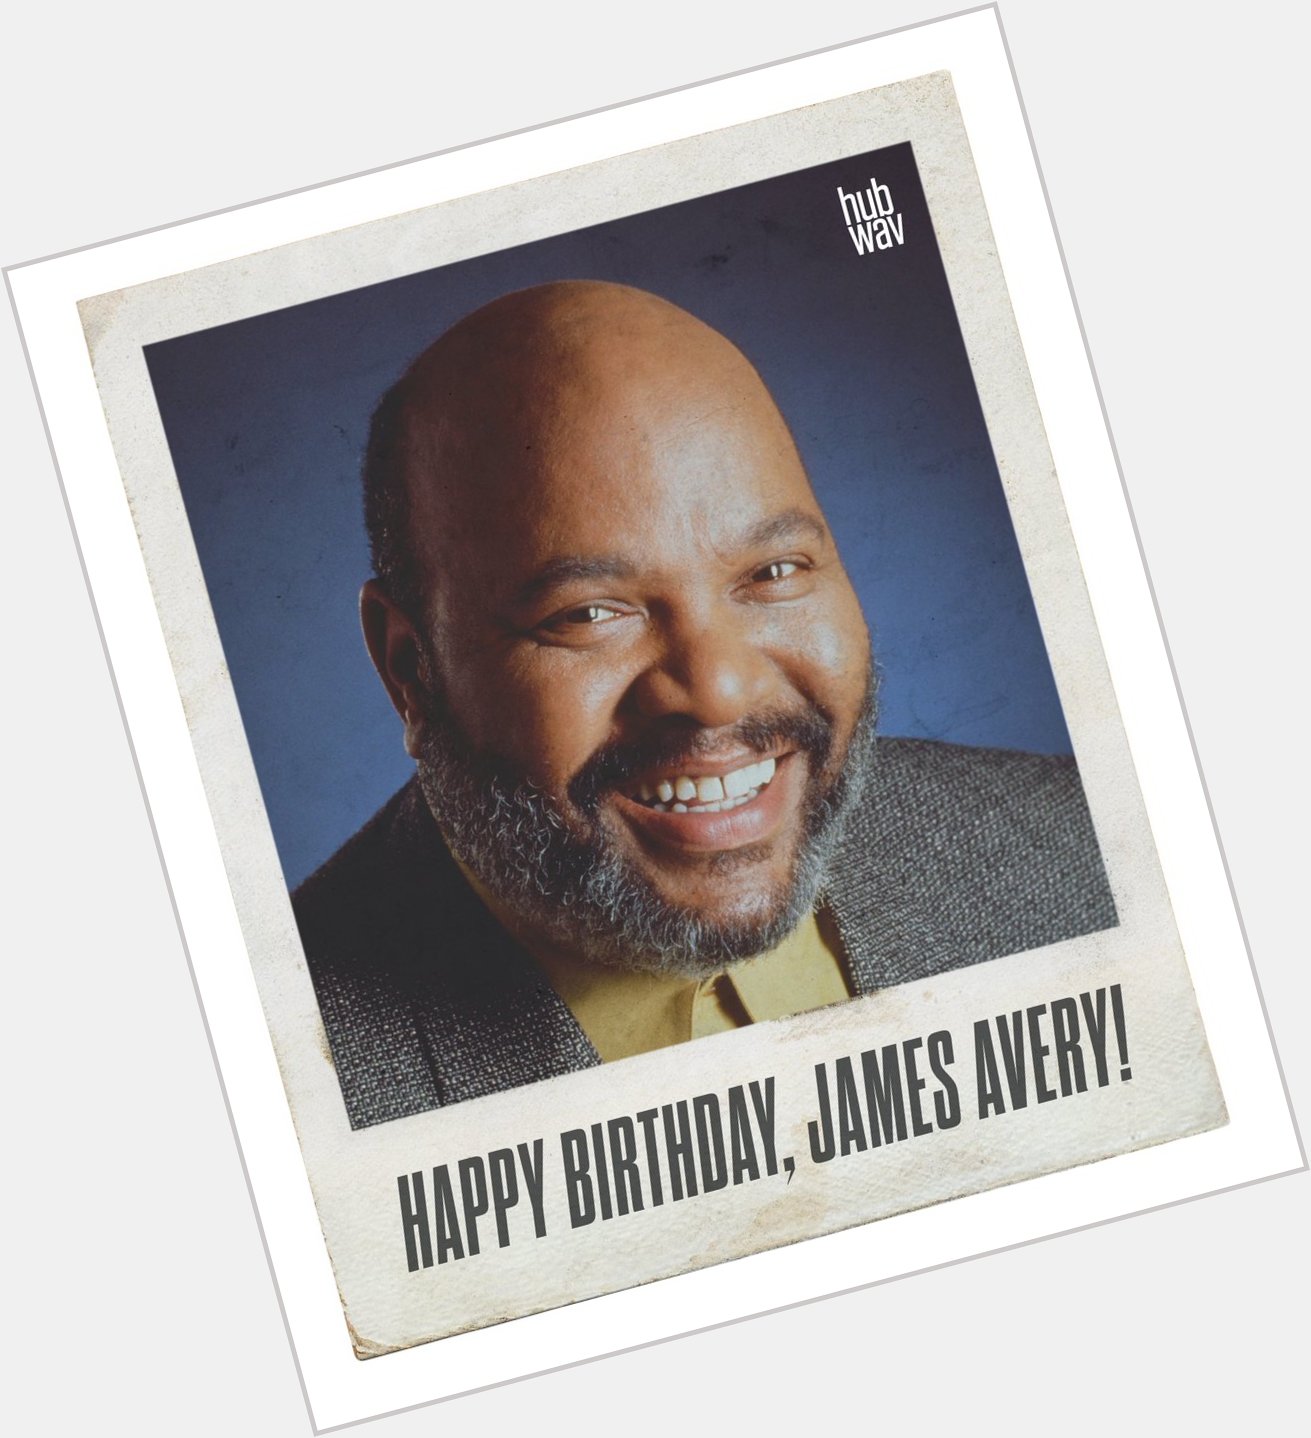 First things first RIP Uncle Phil! Happy birthday, James Avery!  